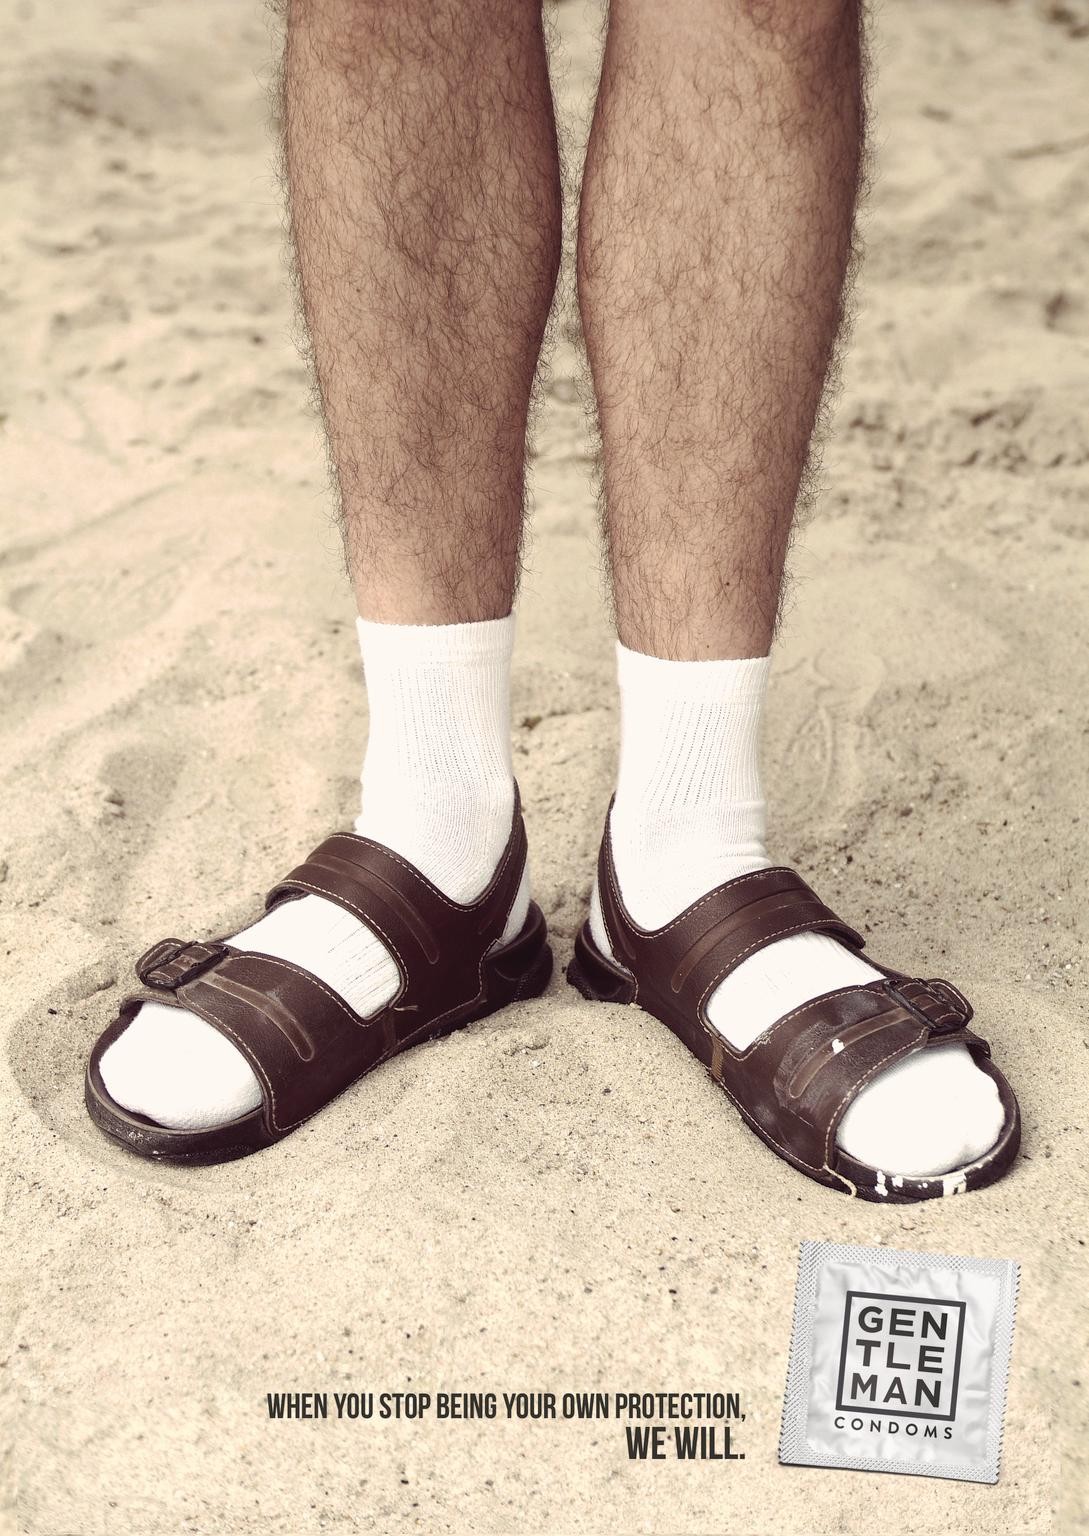 SOCKS AND SANDALS